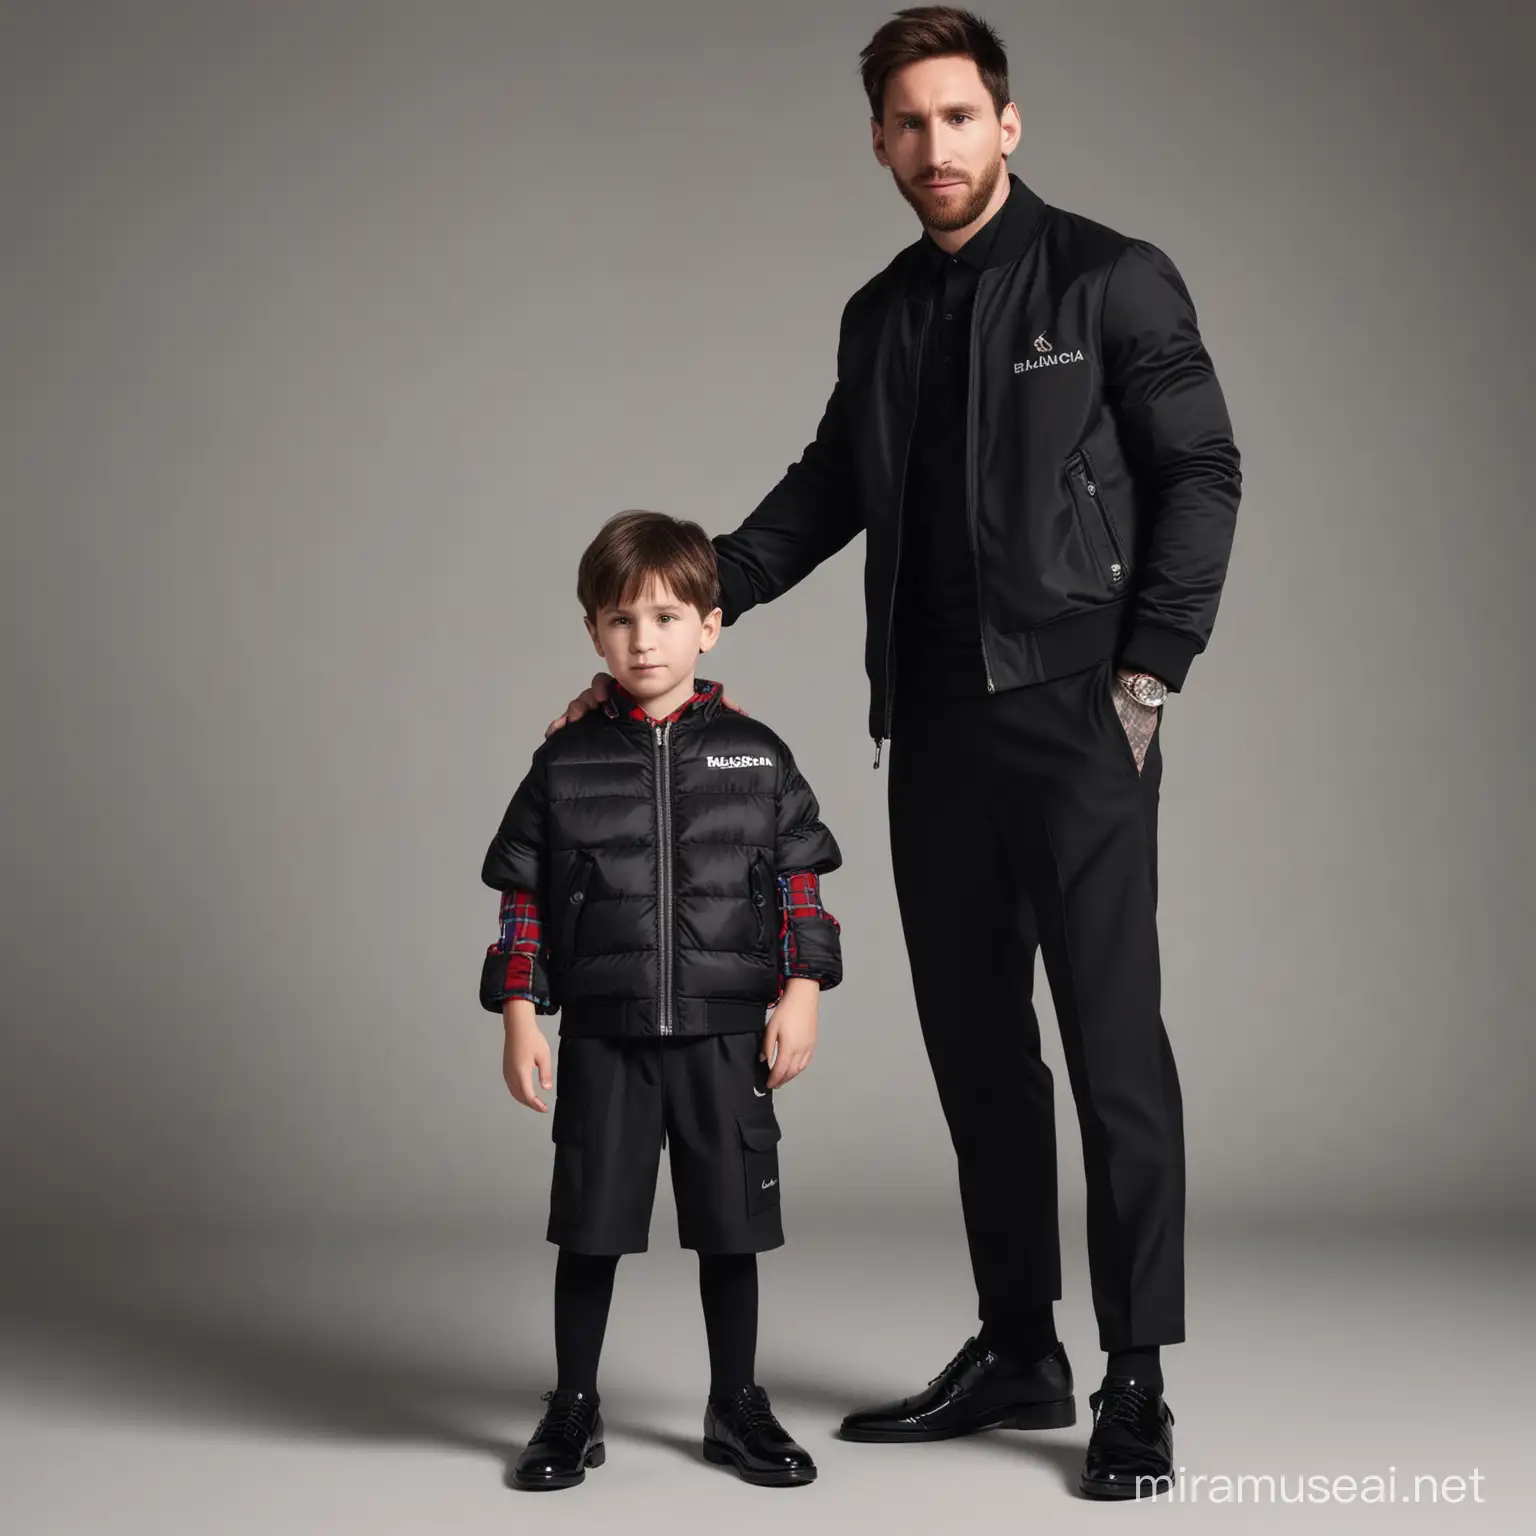 Create an image featuring Lionel Messi and his son, both dressed in Balenciaga outfits. Ensure that the clothing reflects the brand's distinctive style while being suitable for a warm and modern family atmosphere. Showcase the special bond between father and son in this elegant representation of fashion and fatherhood.